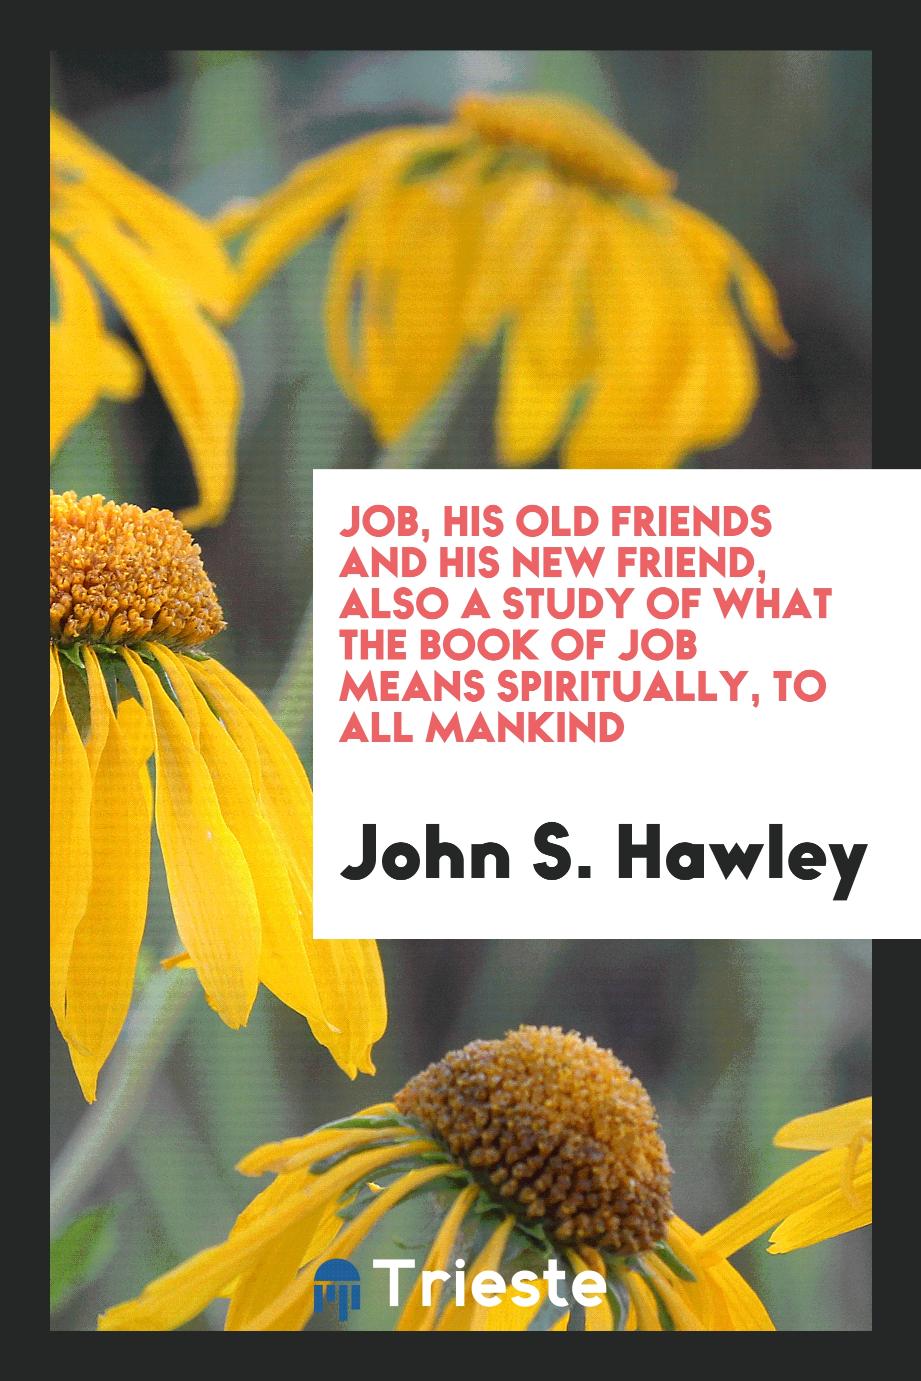 Job, His Old Friends and His New Friend, Also a Study of What the Book of Job Means Spiritually, to All Mankind